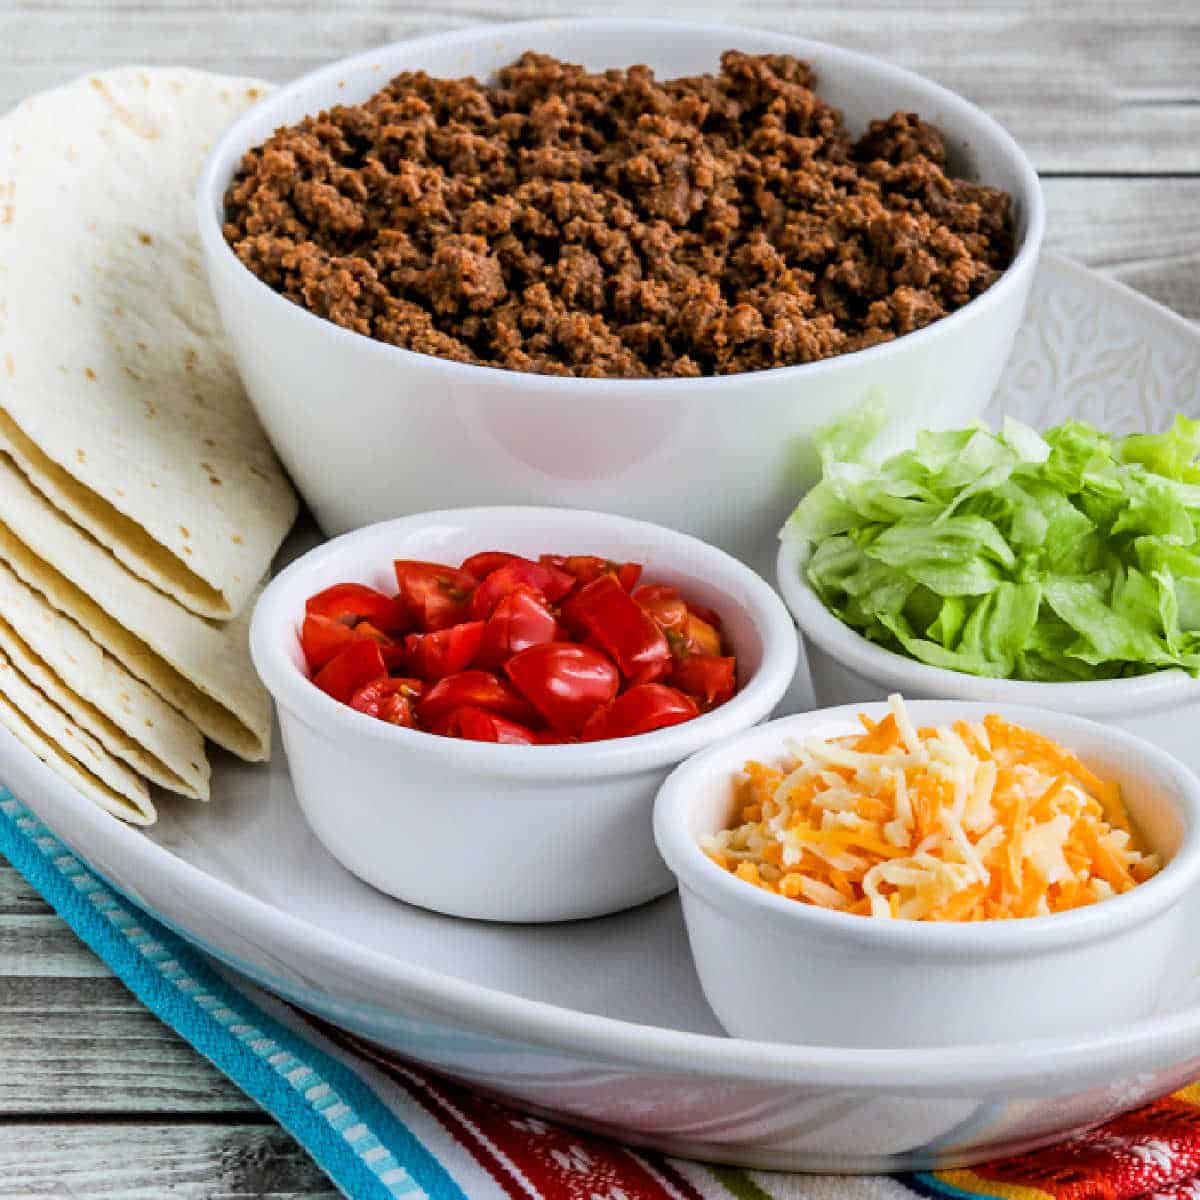 Square image of Instant Pot Taco Meat shown on serving platter with tortillas, taco meat, tomatoes, lettuce, and cheese.